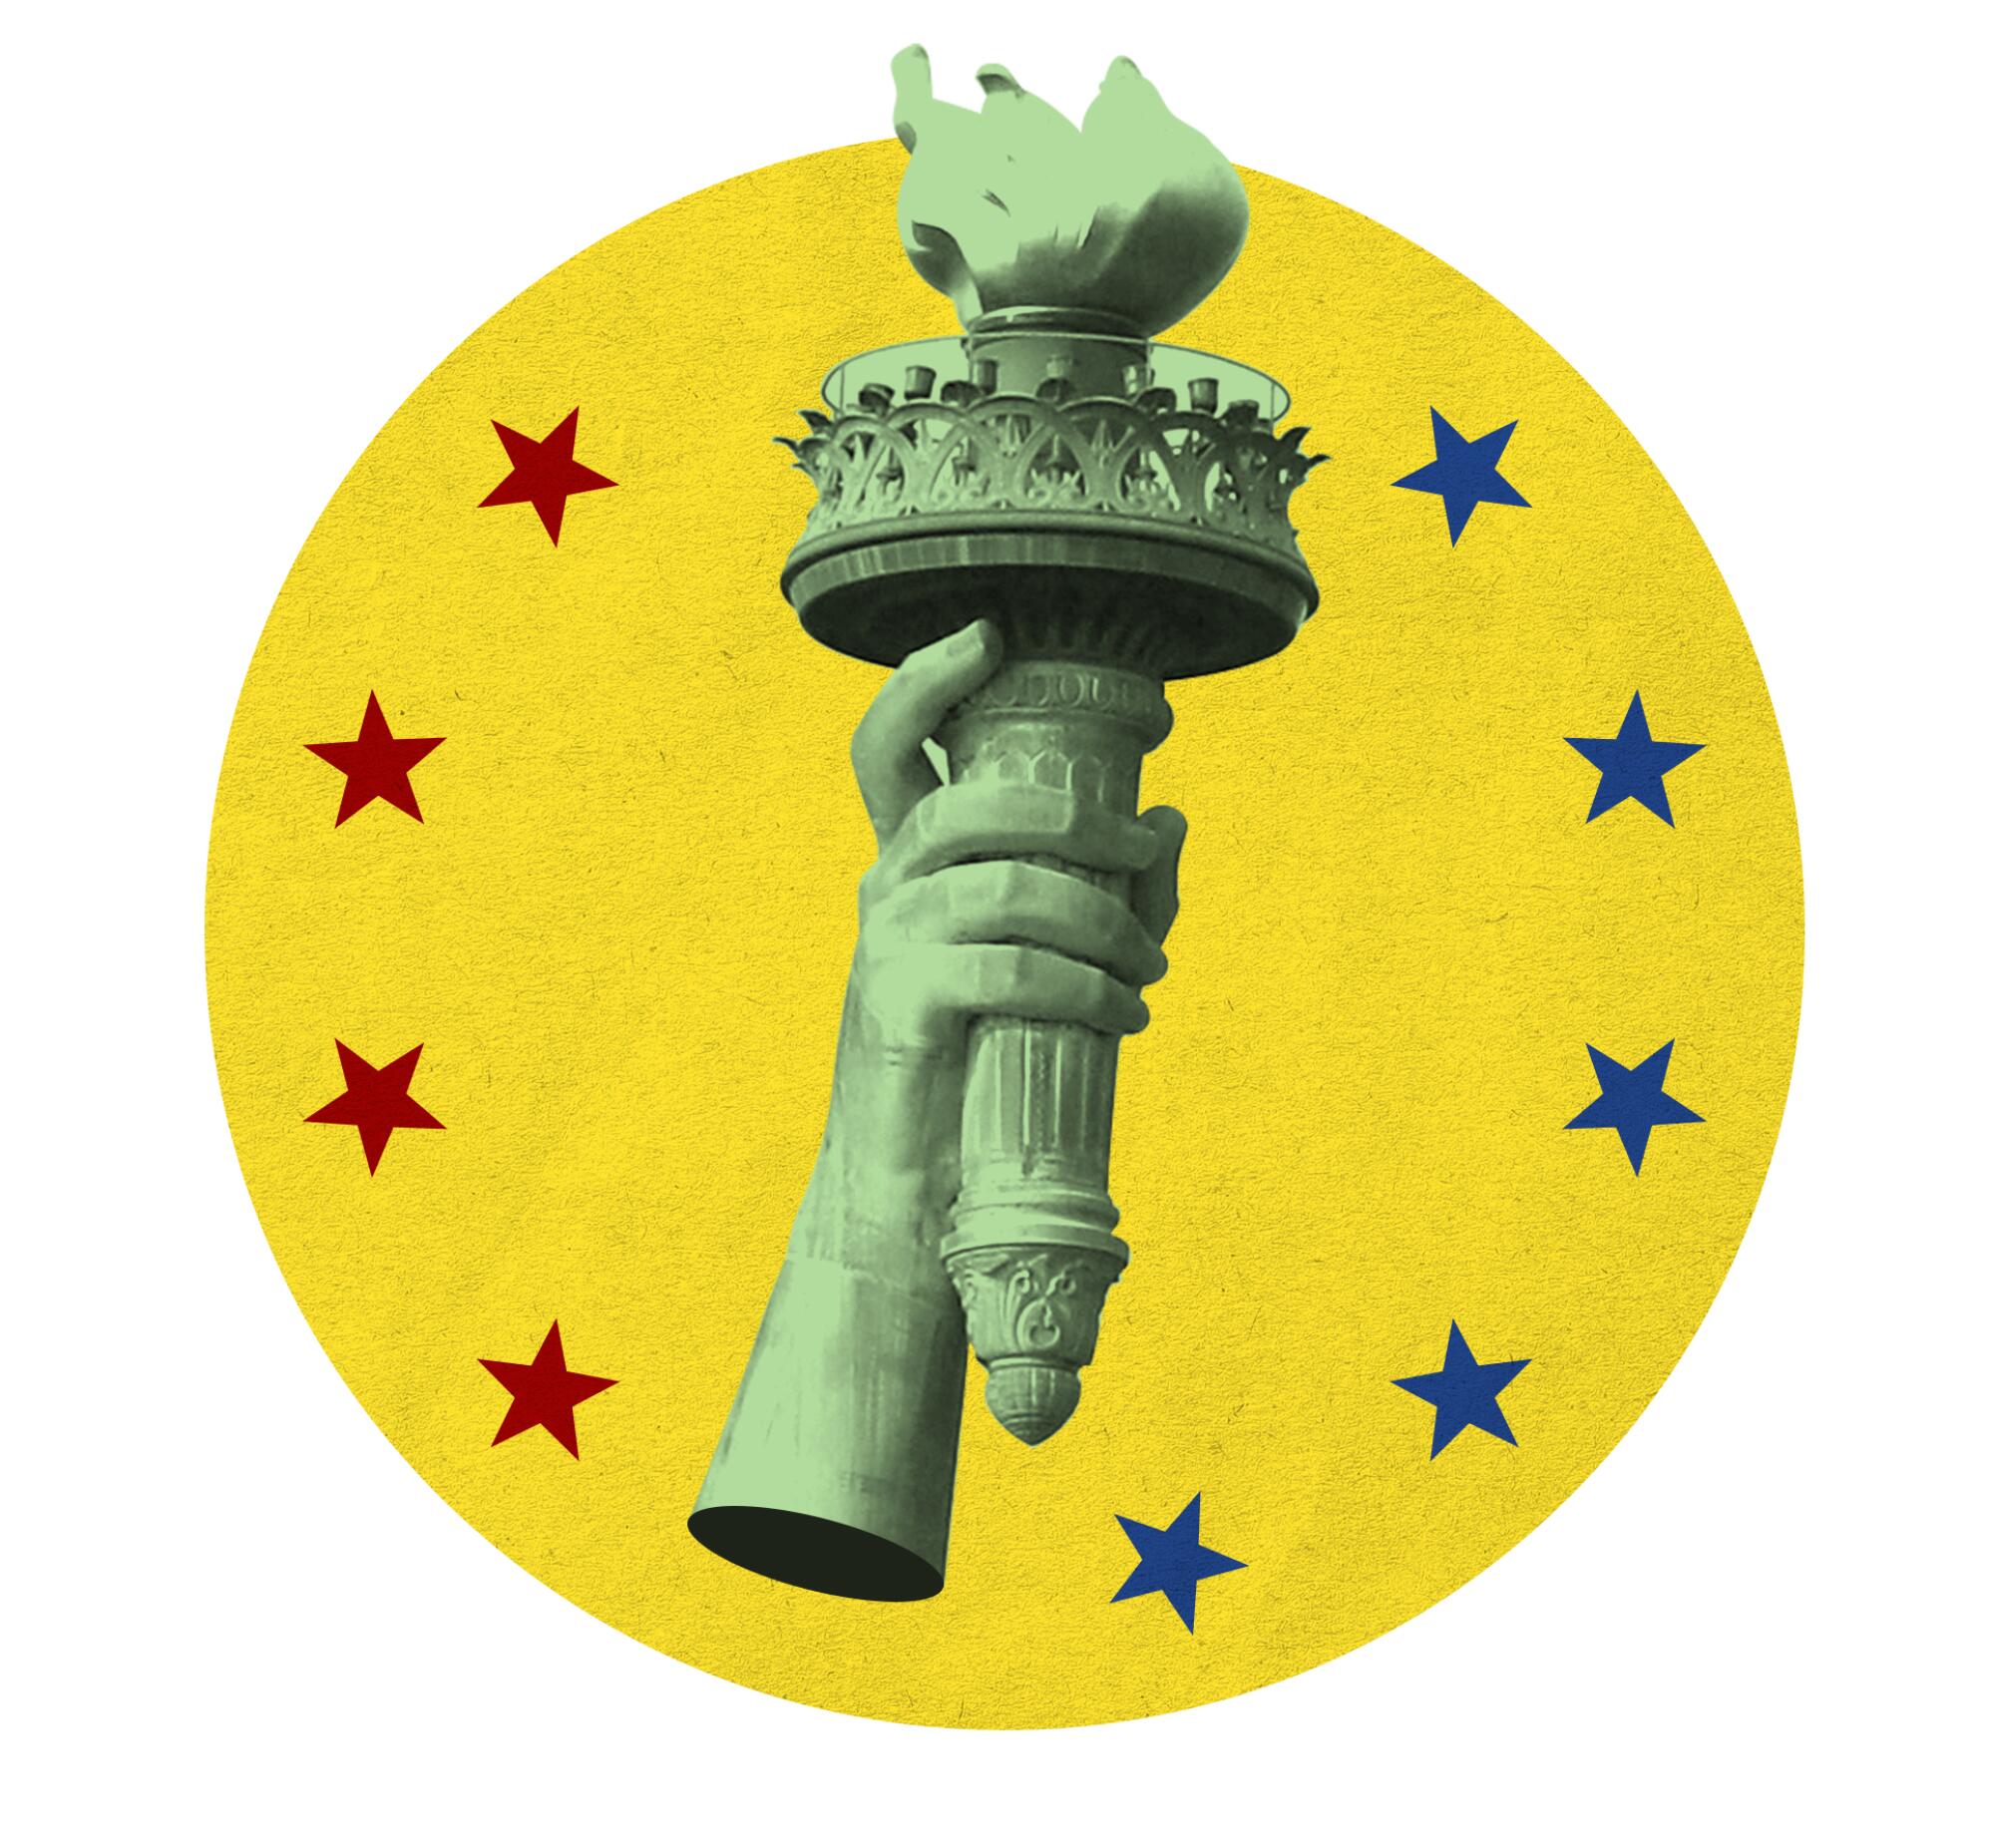 photo of statue of liberty torch in yellow circle with stars